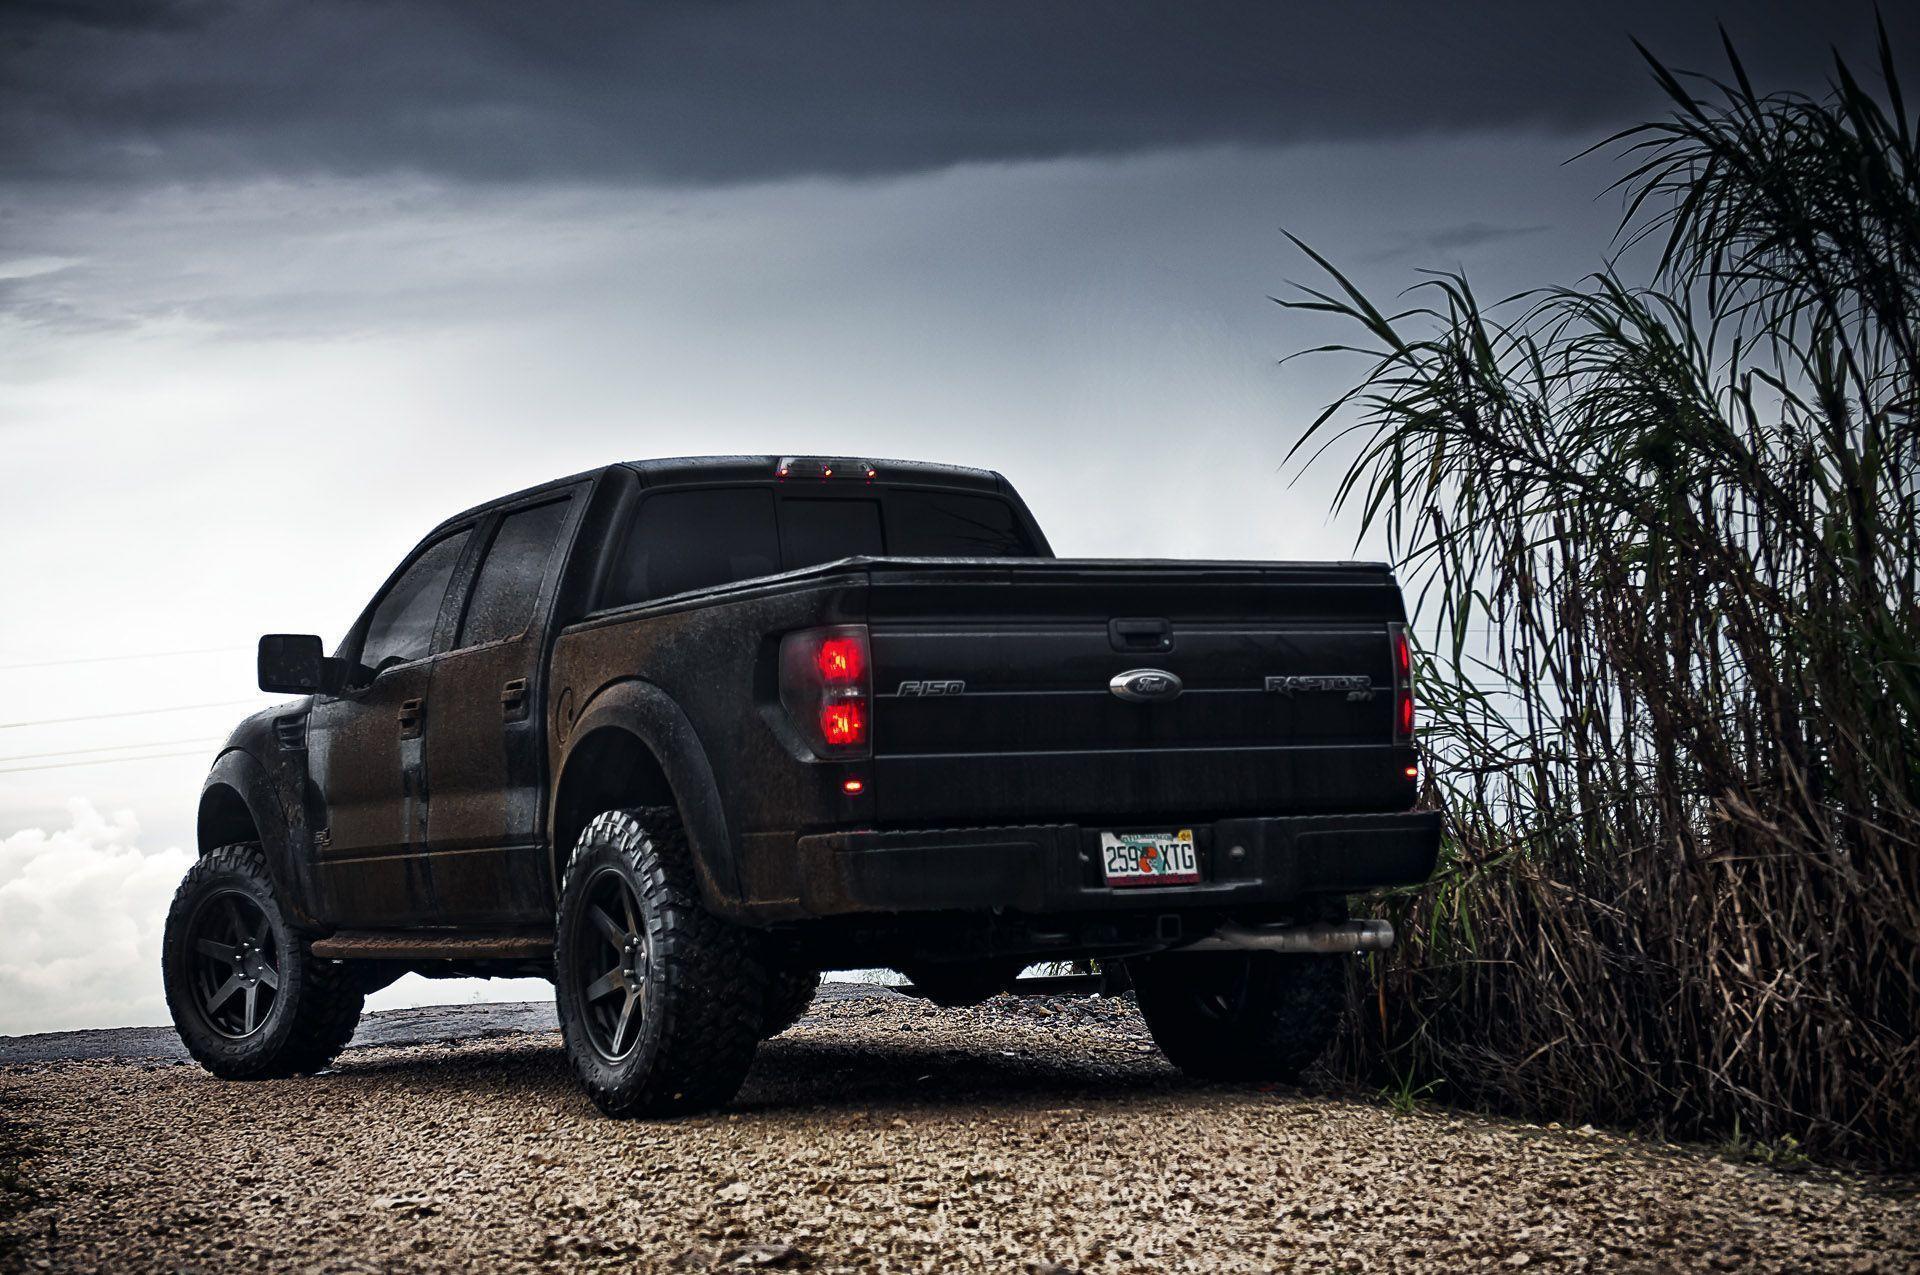 Ford F-150 Raptor Wallpapers - Wallpaper Cave